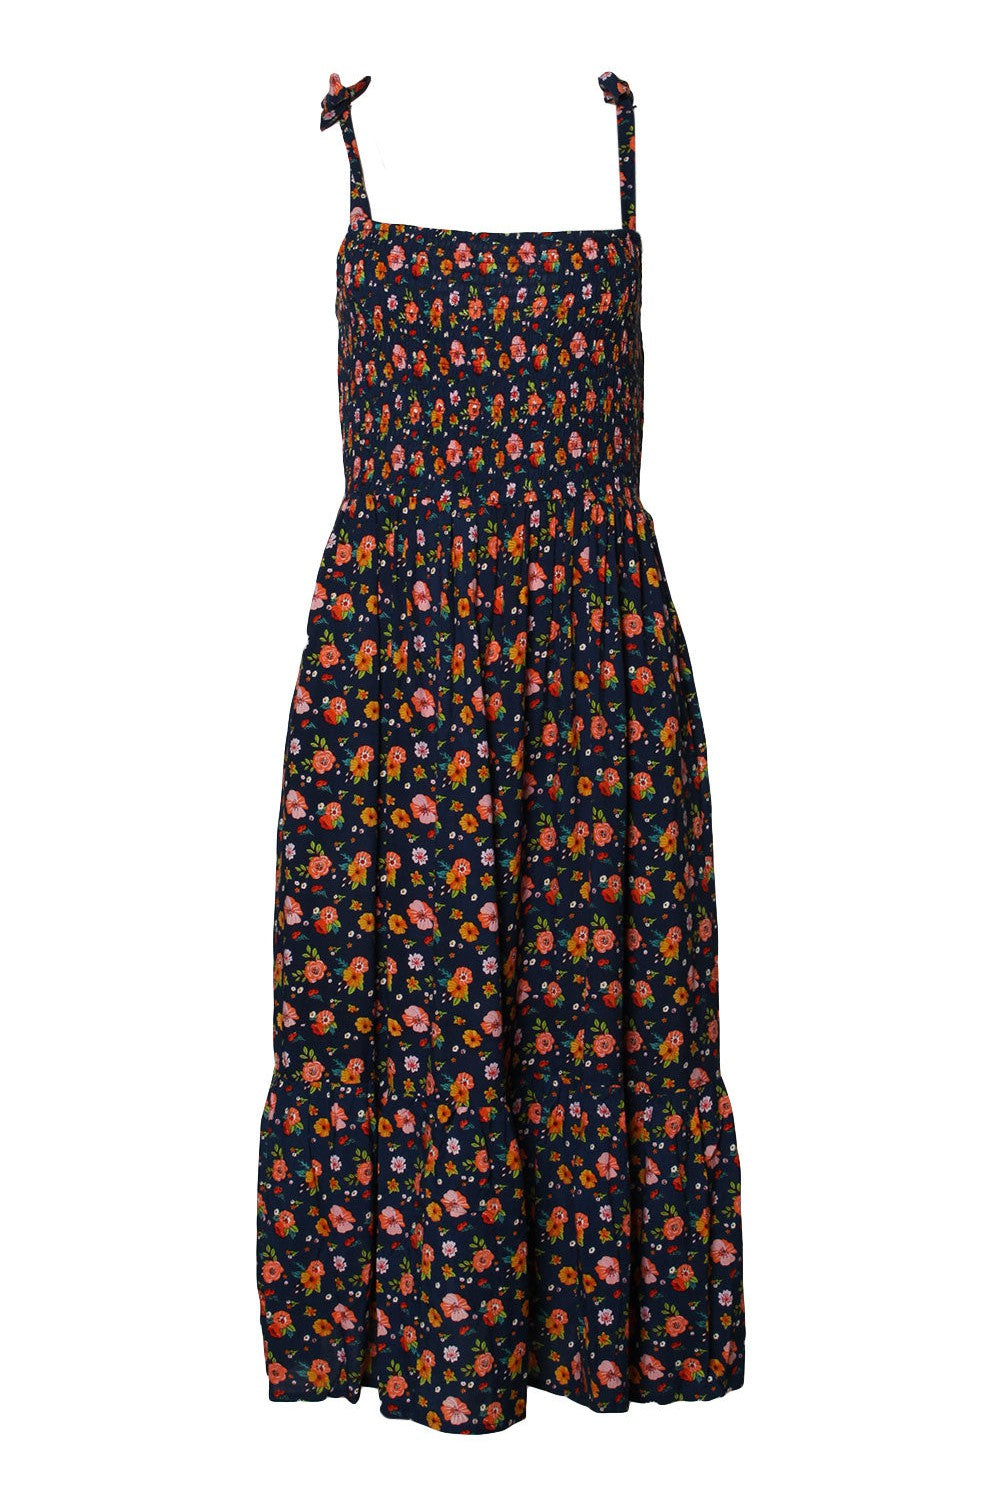 Circus Alice La Dress-Womens-Ohh! By Gum - Shop Sustainable